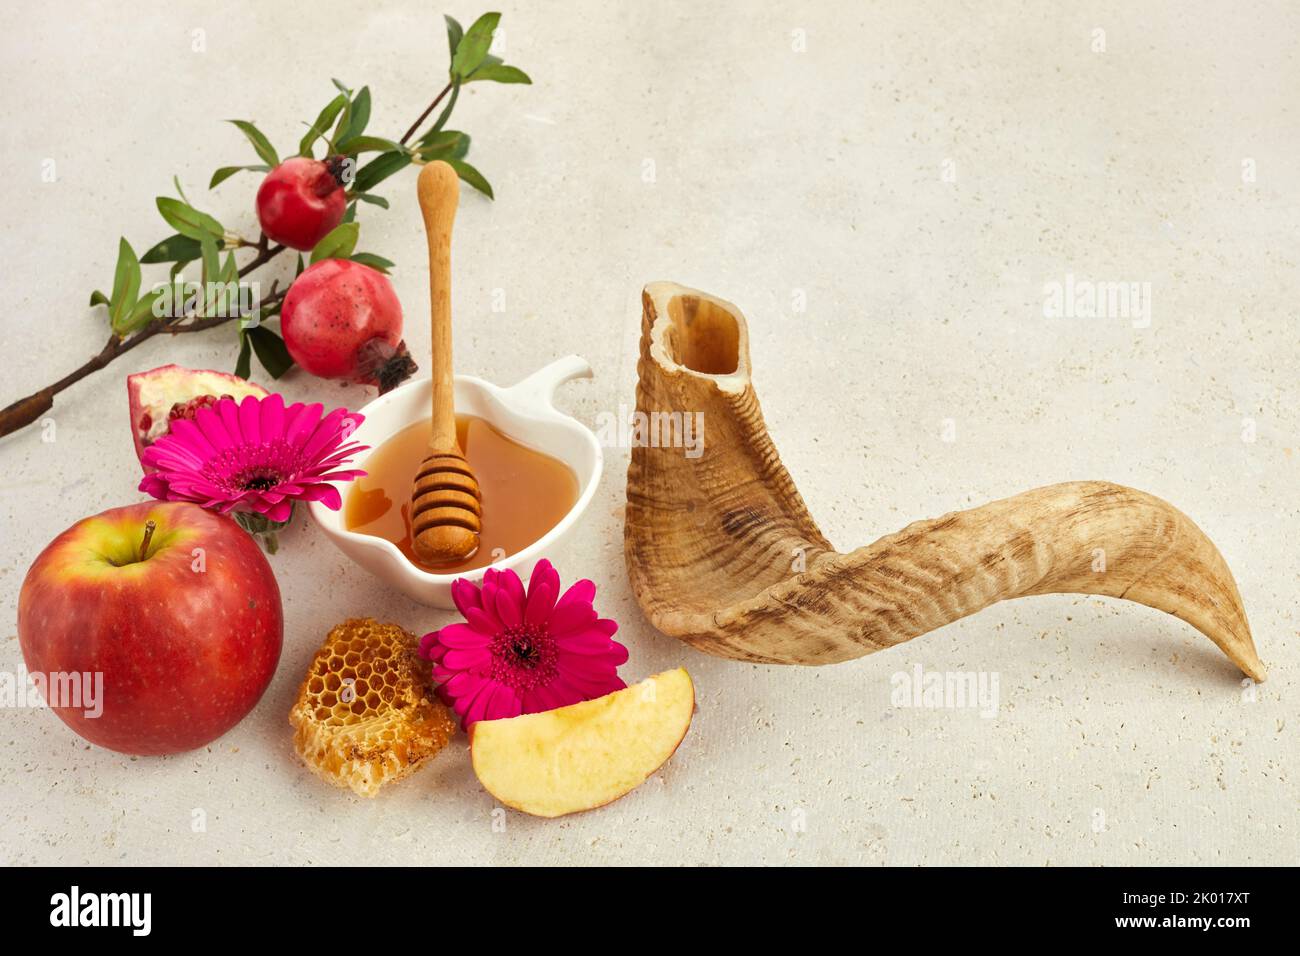 Rosh hashanah, jewish New Year holiday concept. Pomegranate, apples and honey traditional products for celebration. Stock Photo